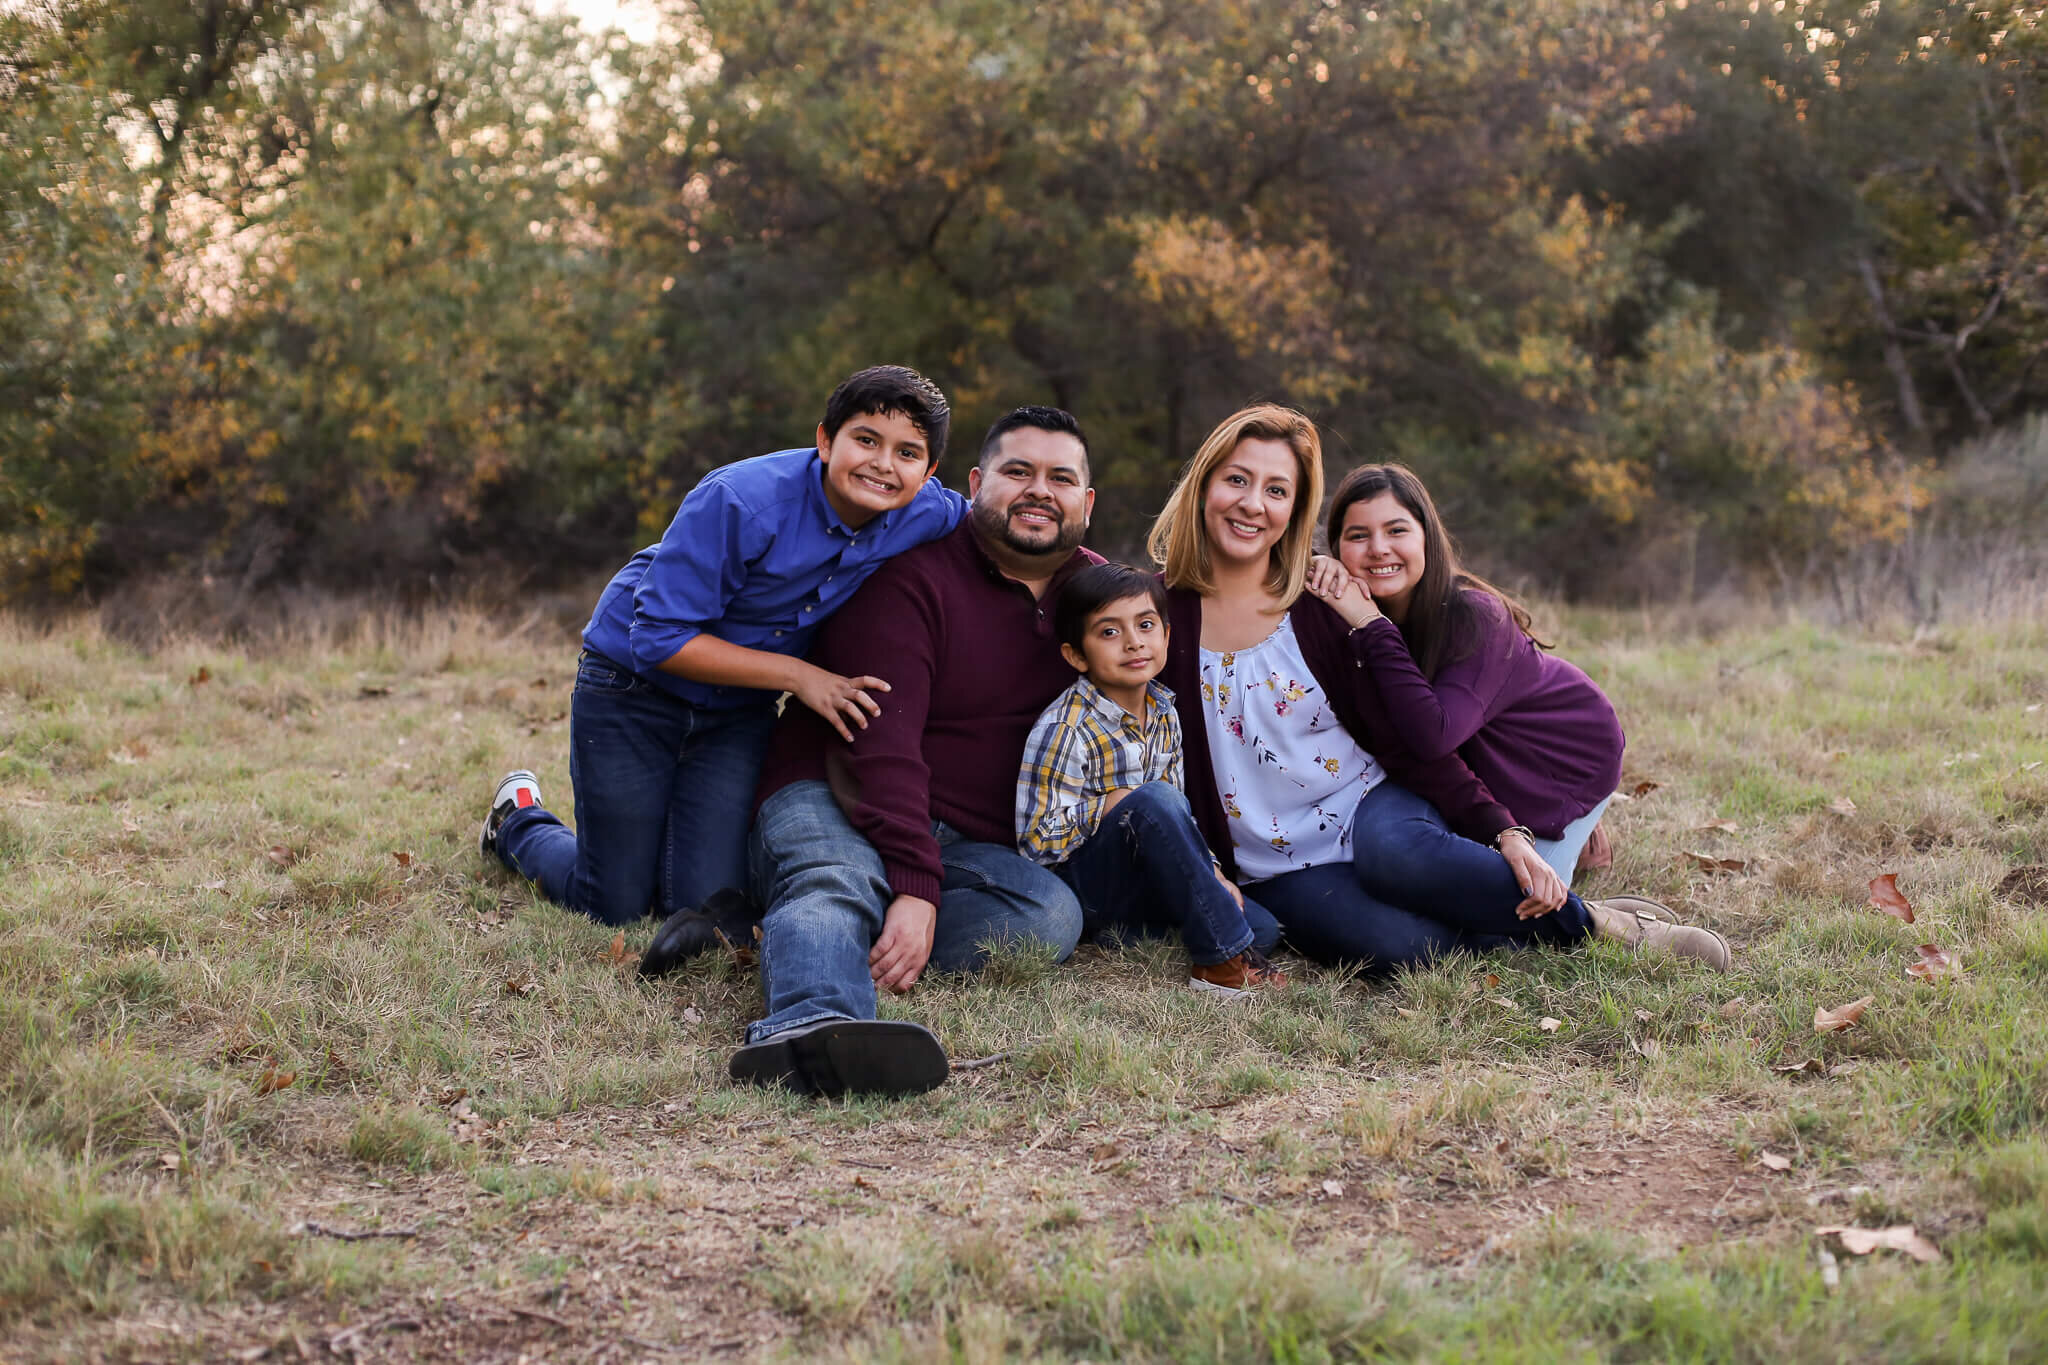  An image of a family sitting on the grass together as they smile warmly, holding each other close, enjoying their time together in a family photo session 